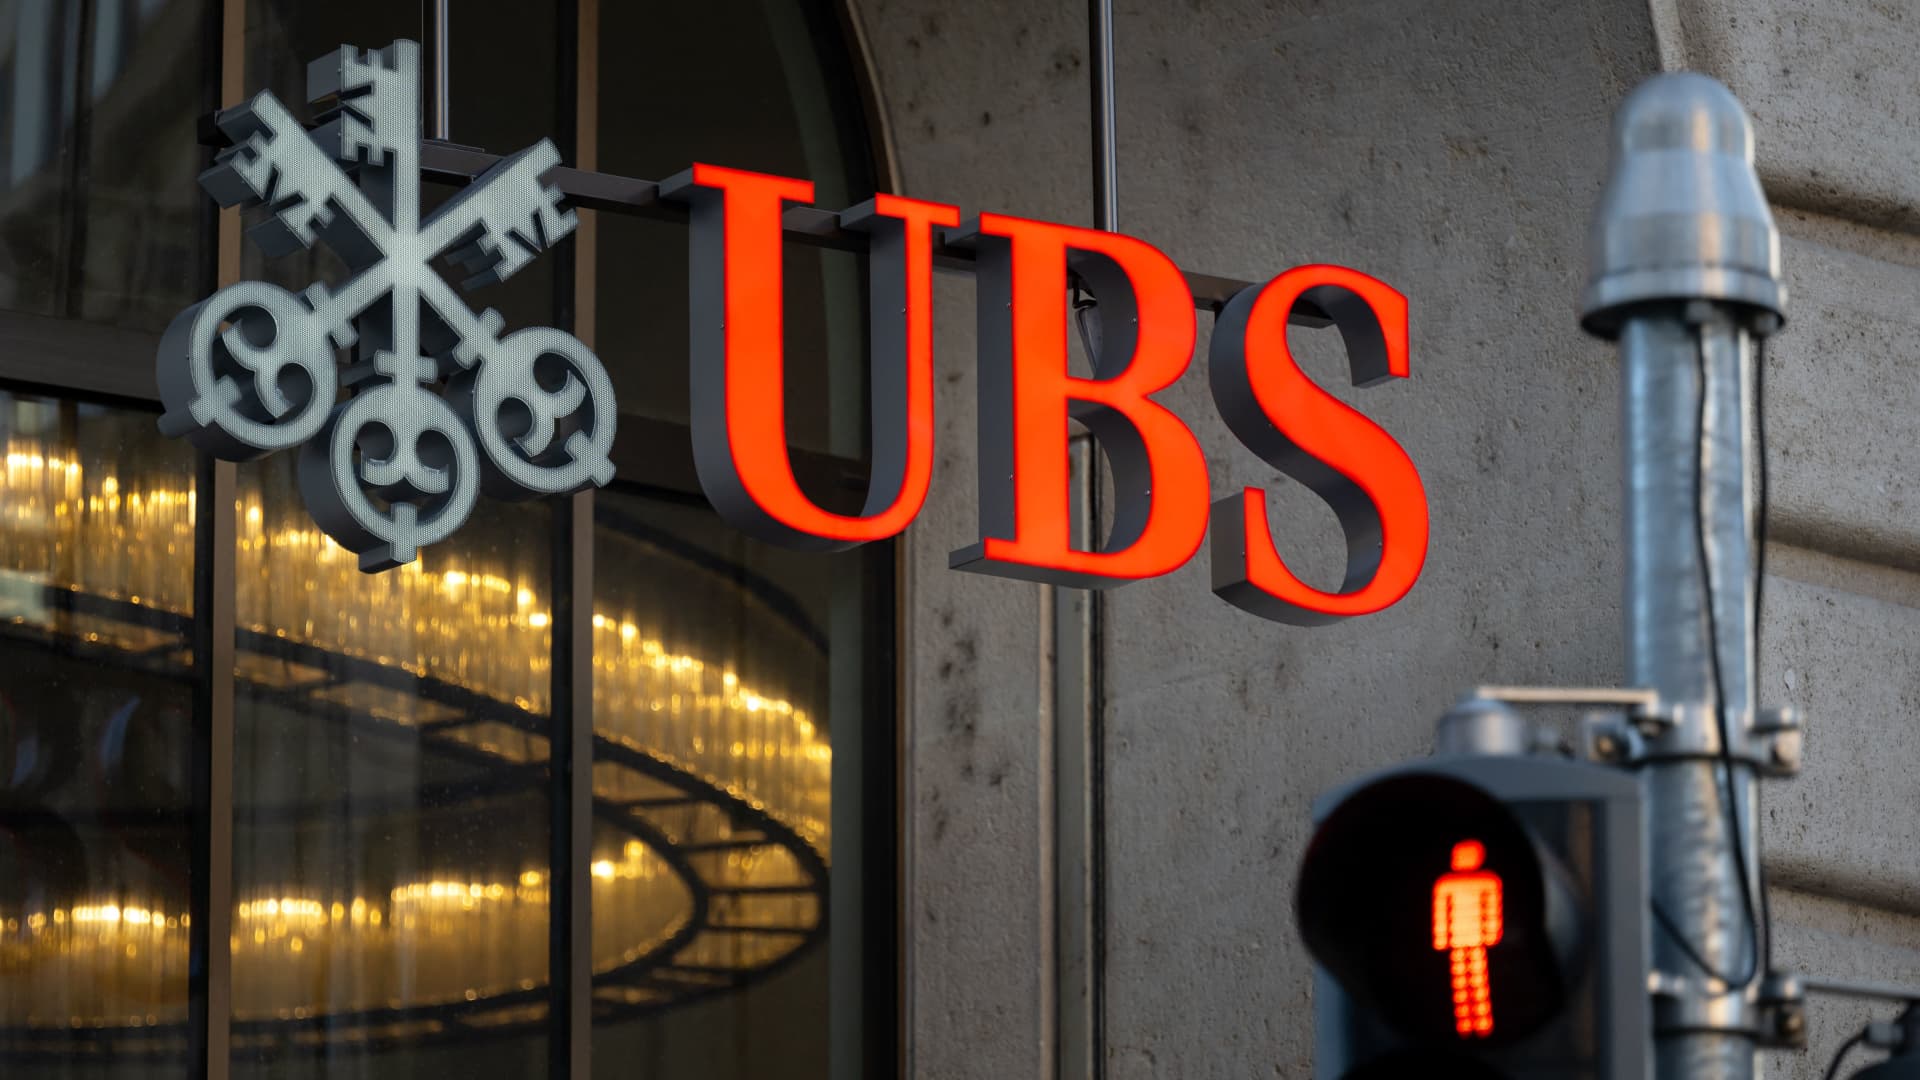 Swiss bank UBS gets a boost from higher interest rates, beats expectations in fourth quarter